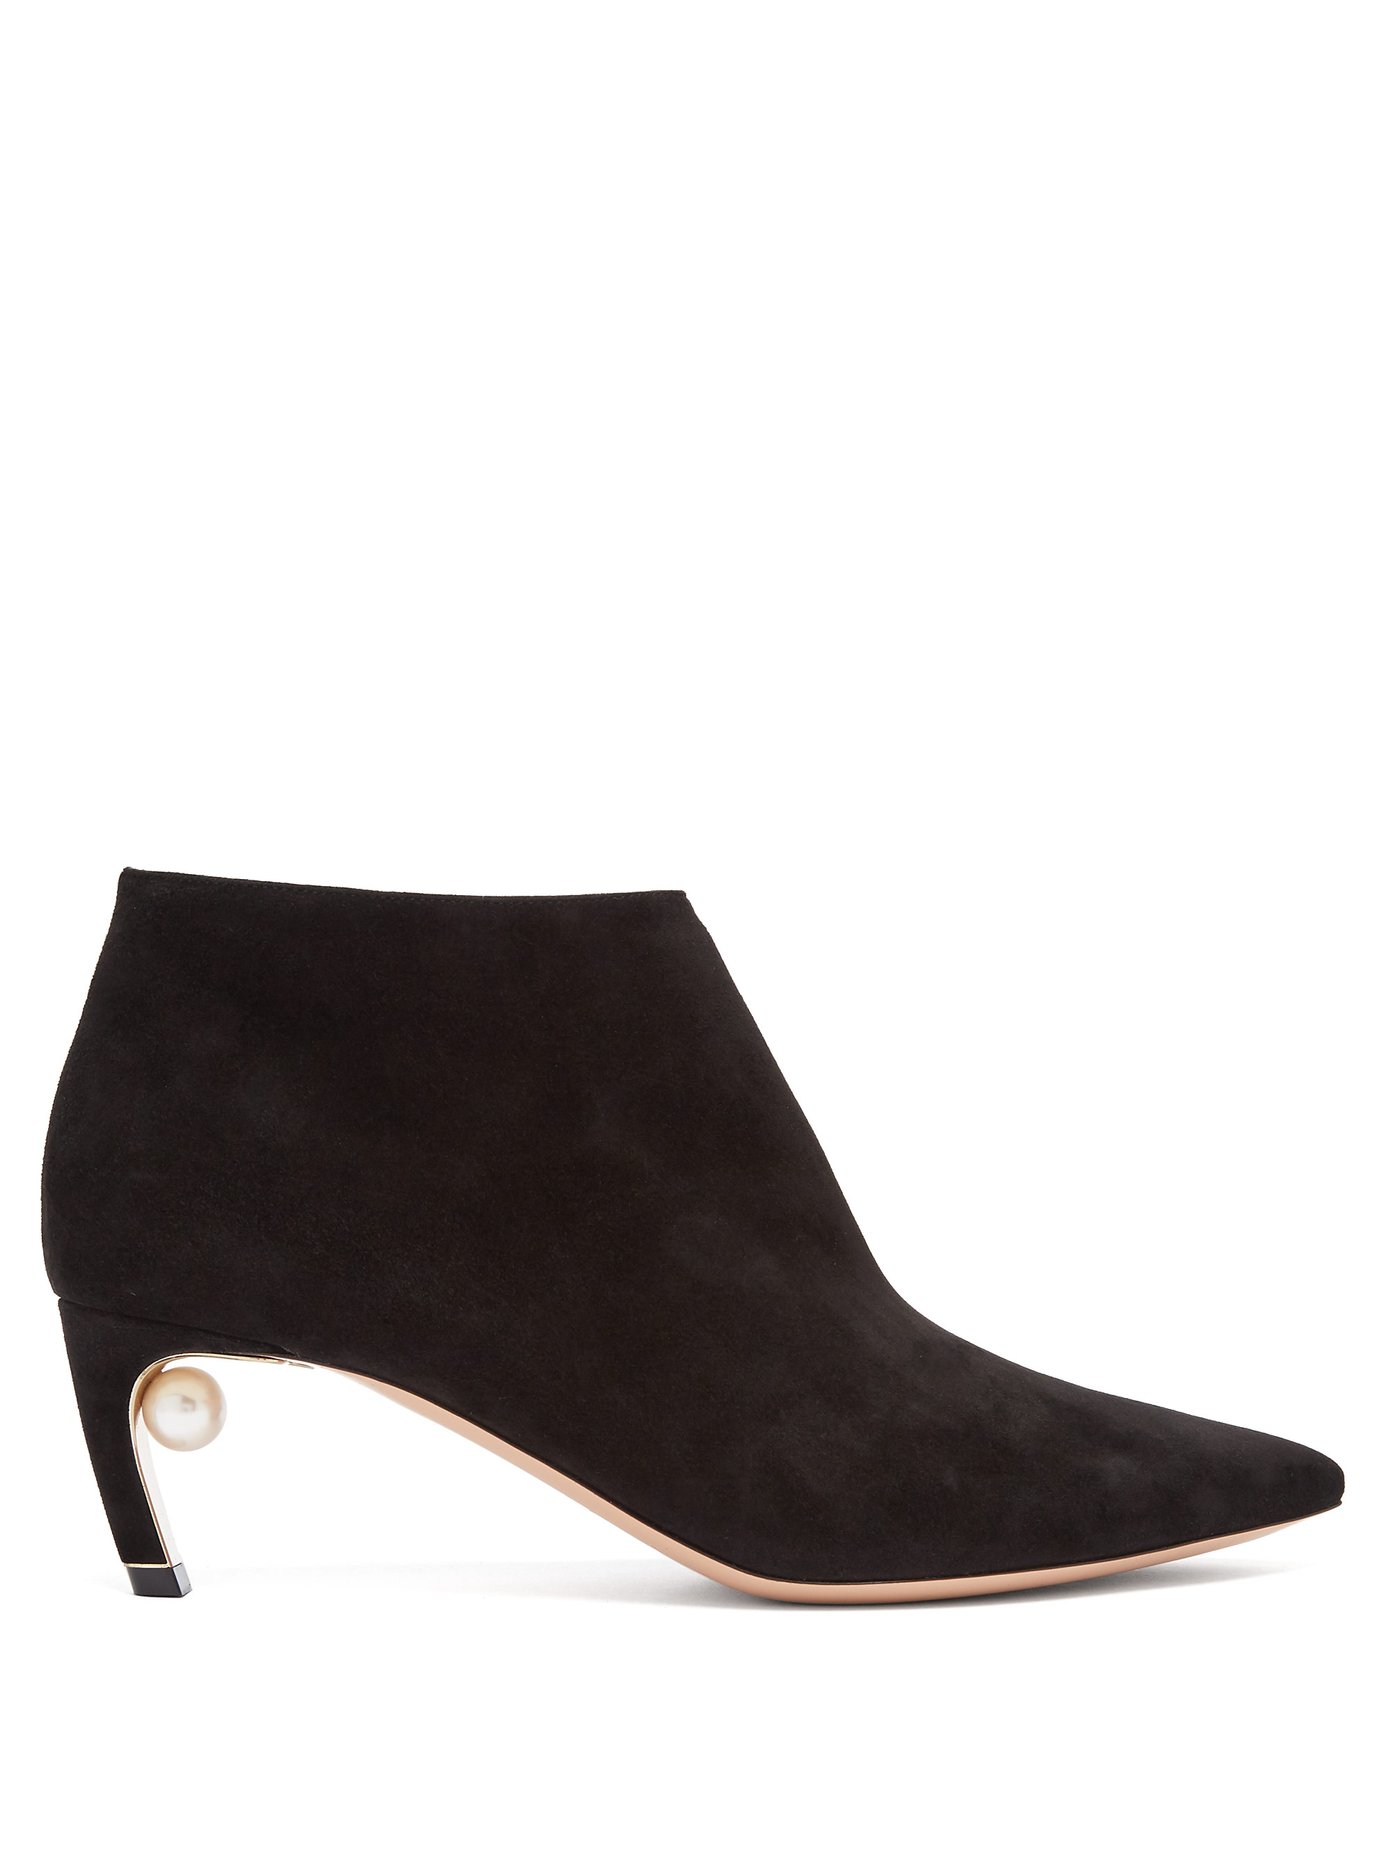 next grey suede ankle boots